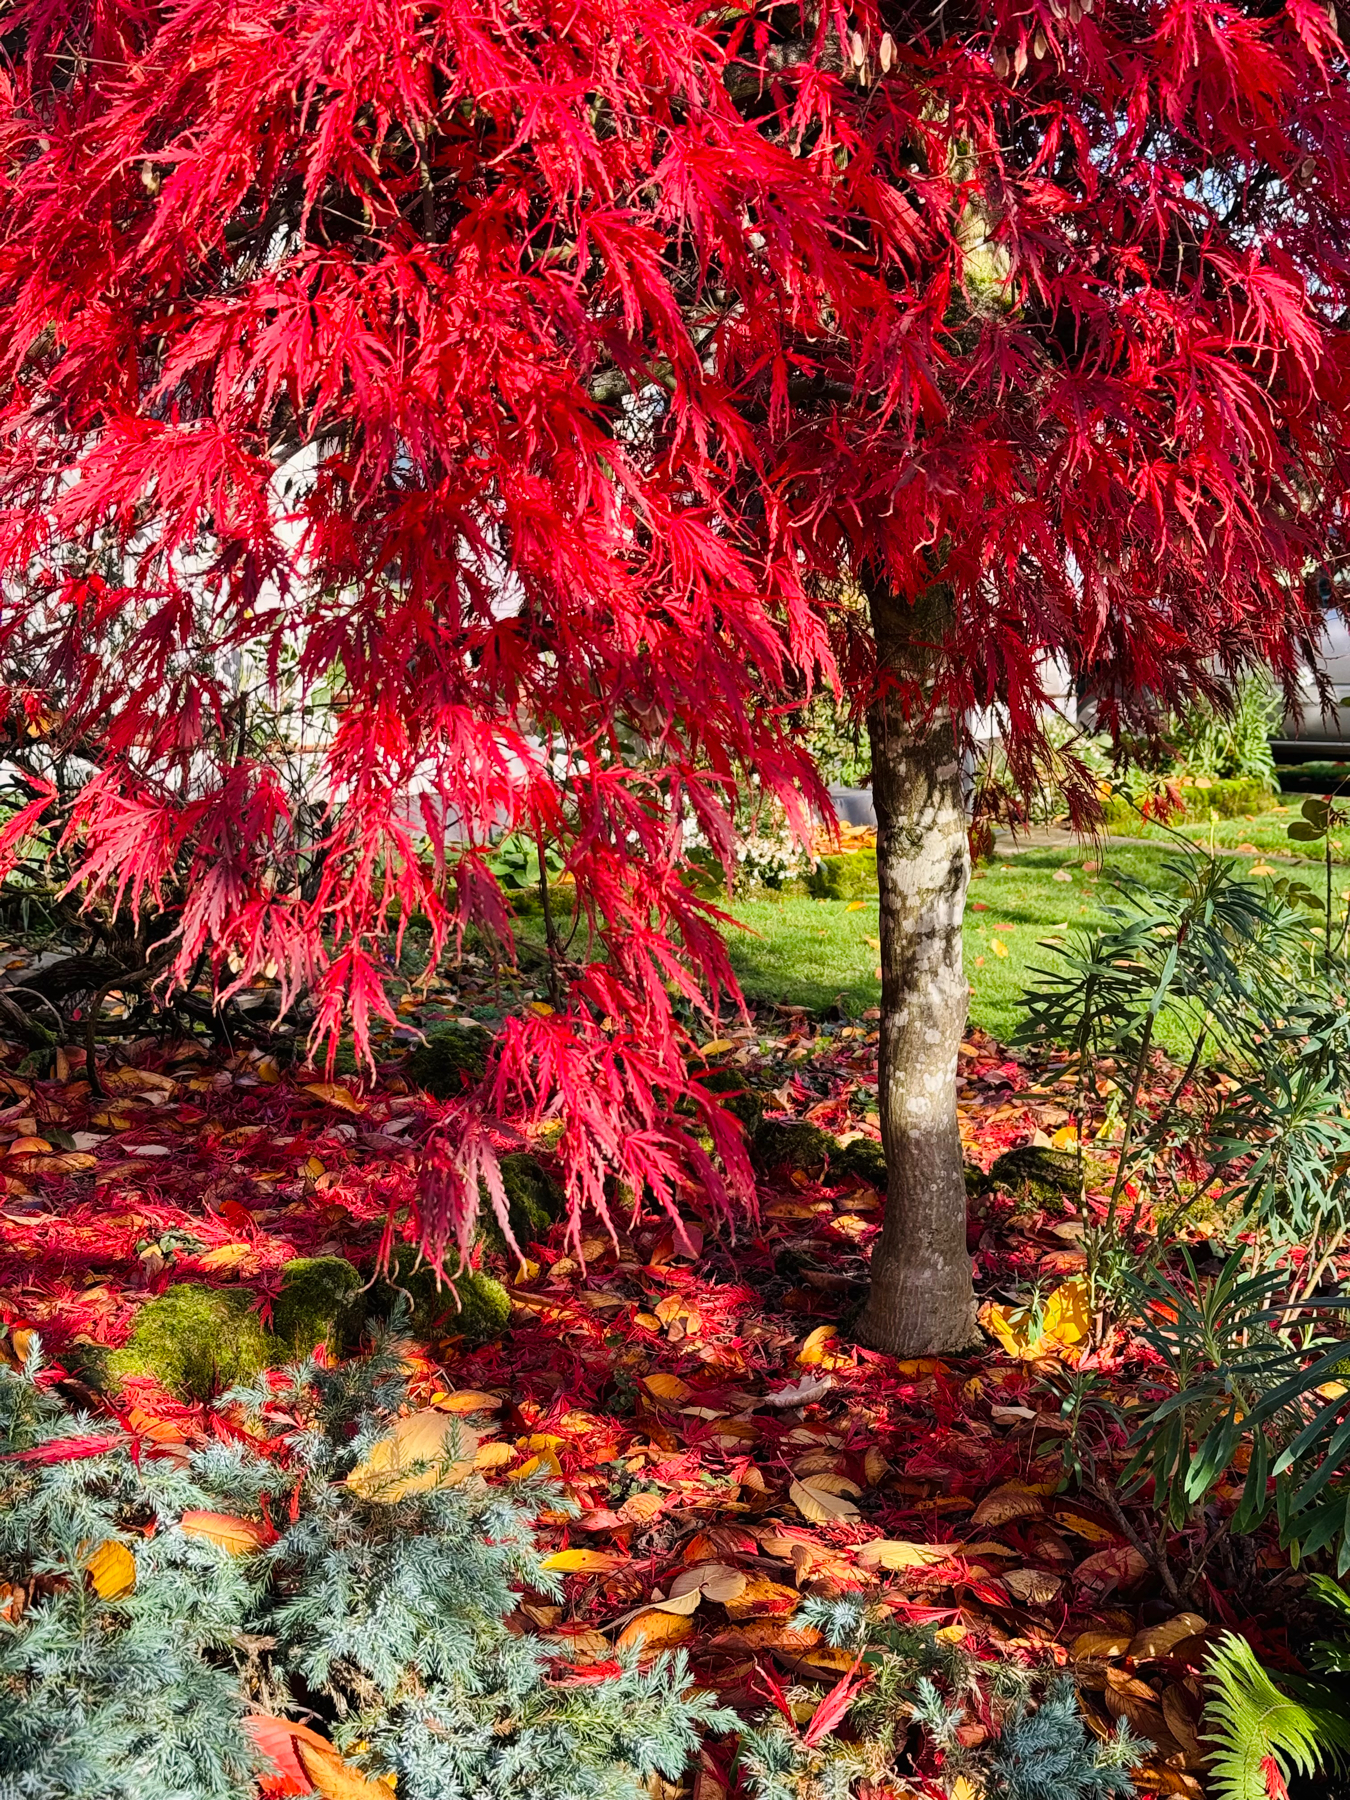 A small maple tree with a variety of fall colored leaves below it. Its leaves are very red. There’s a bright green lawn in the background.